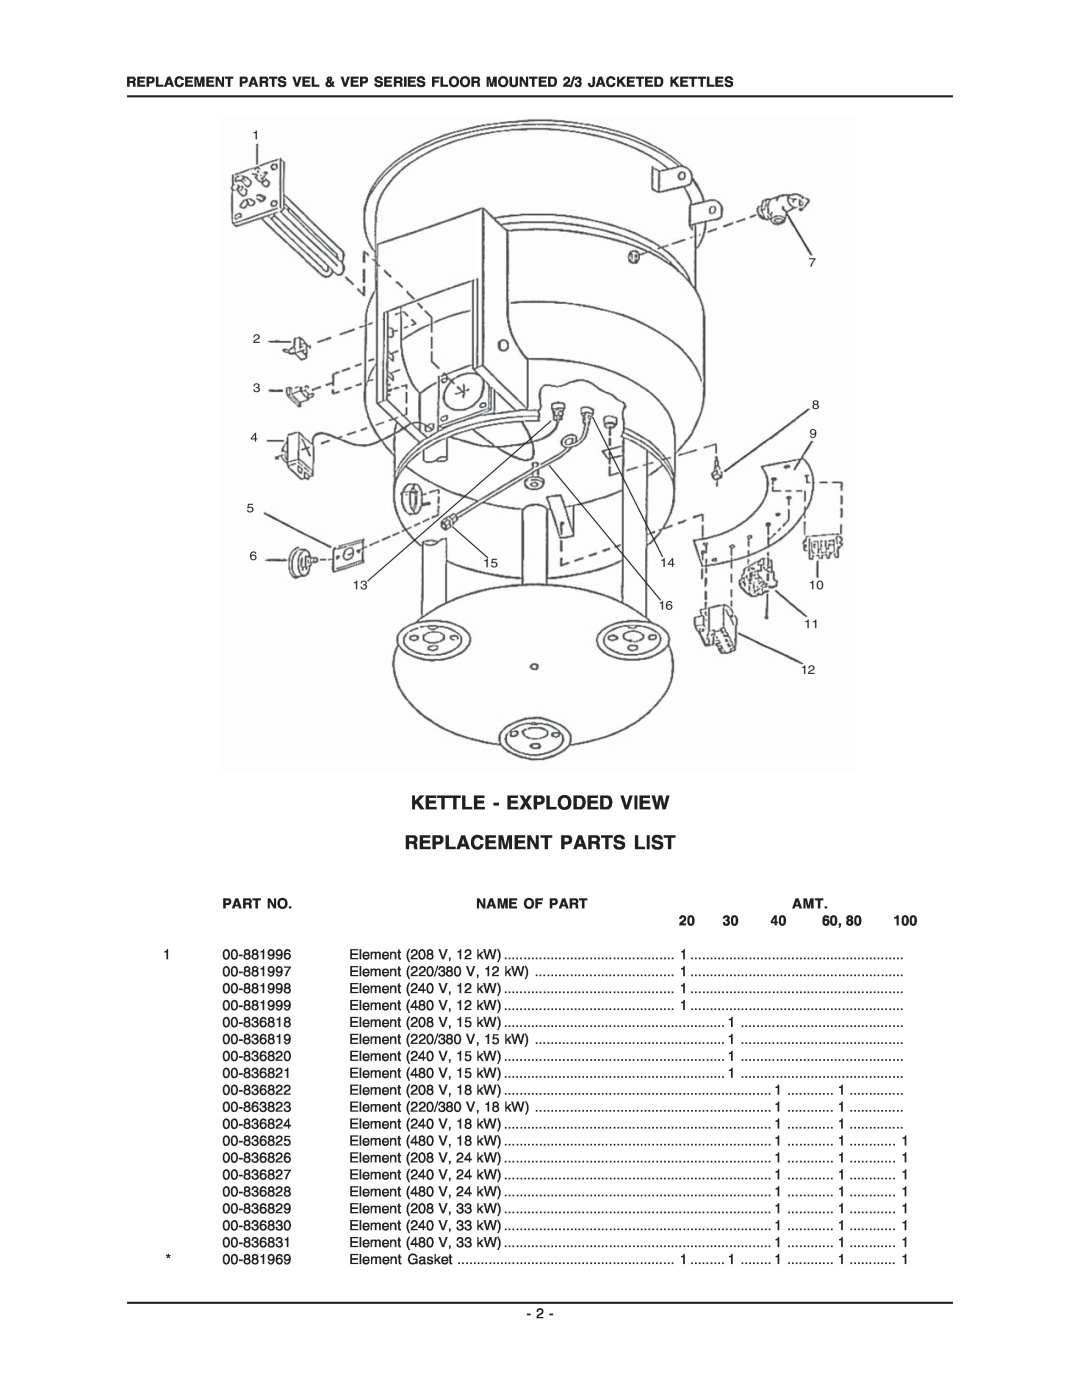 Vulcan-Hart VEP80, VEP40, VEP30, VEL60, VEL40, VEP100, VEL30, VEP60 Kettle - Exploded View Replacement Parts List, Name Of Part 